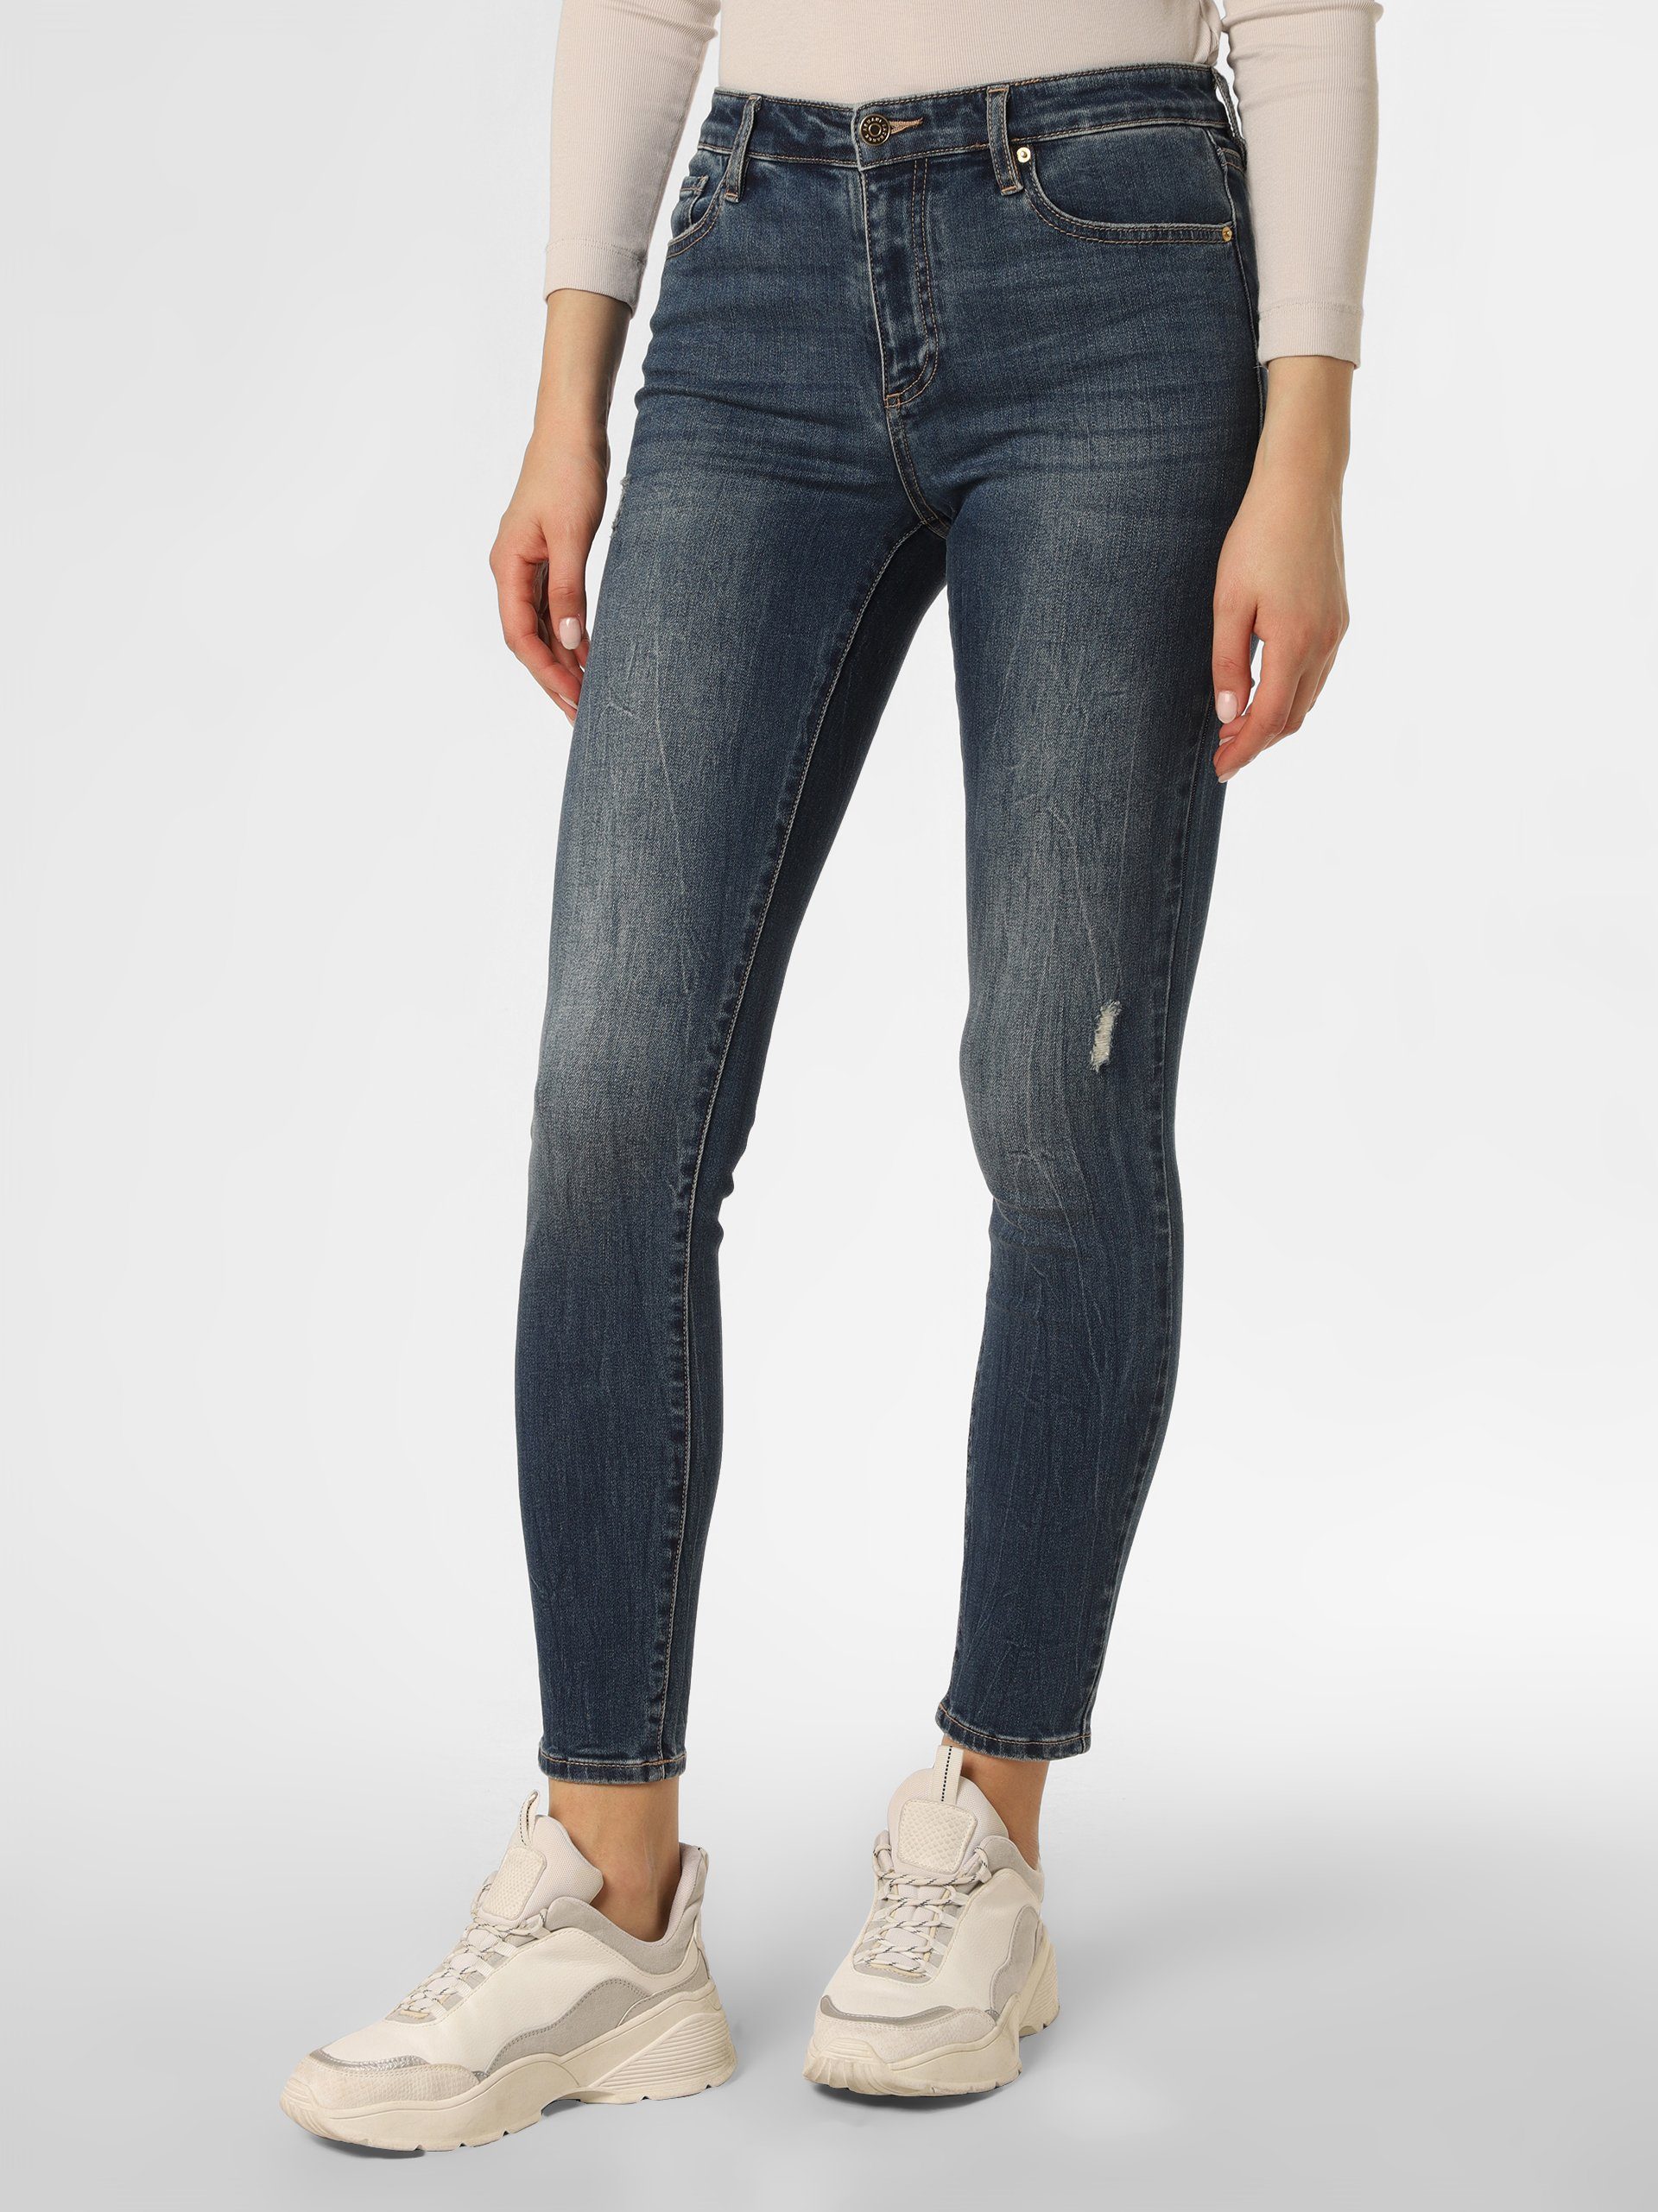 Armani Exchange Connected Skinny-fit-Jeans